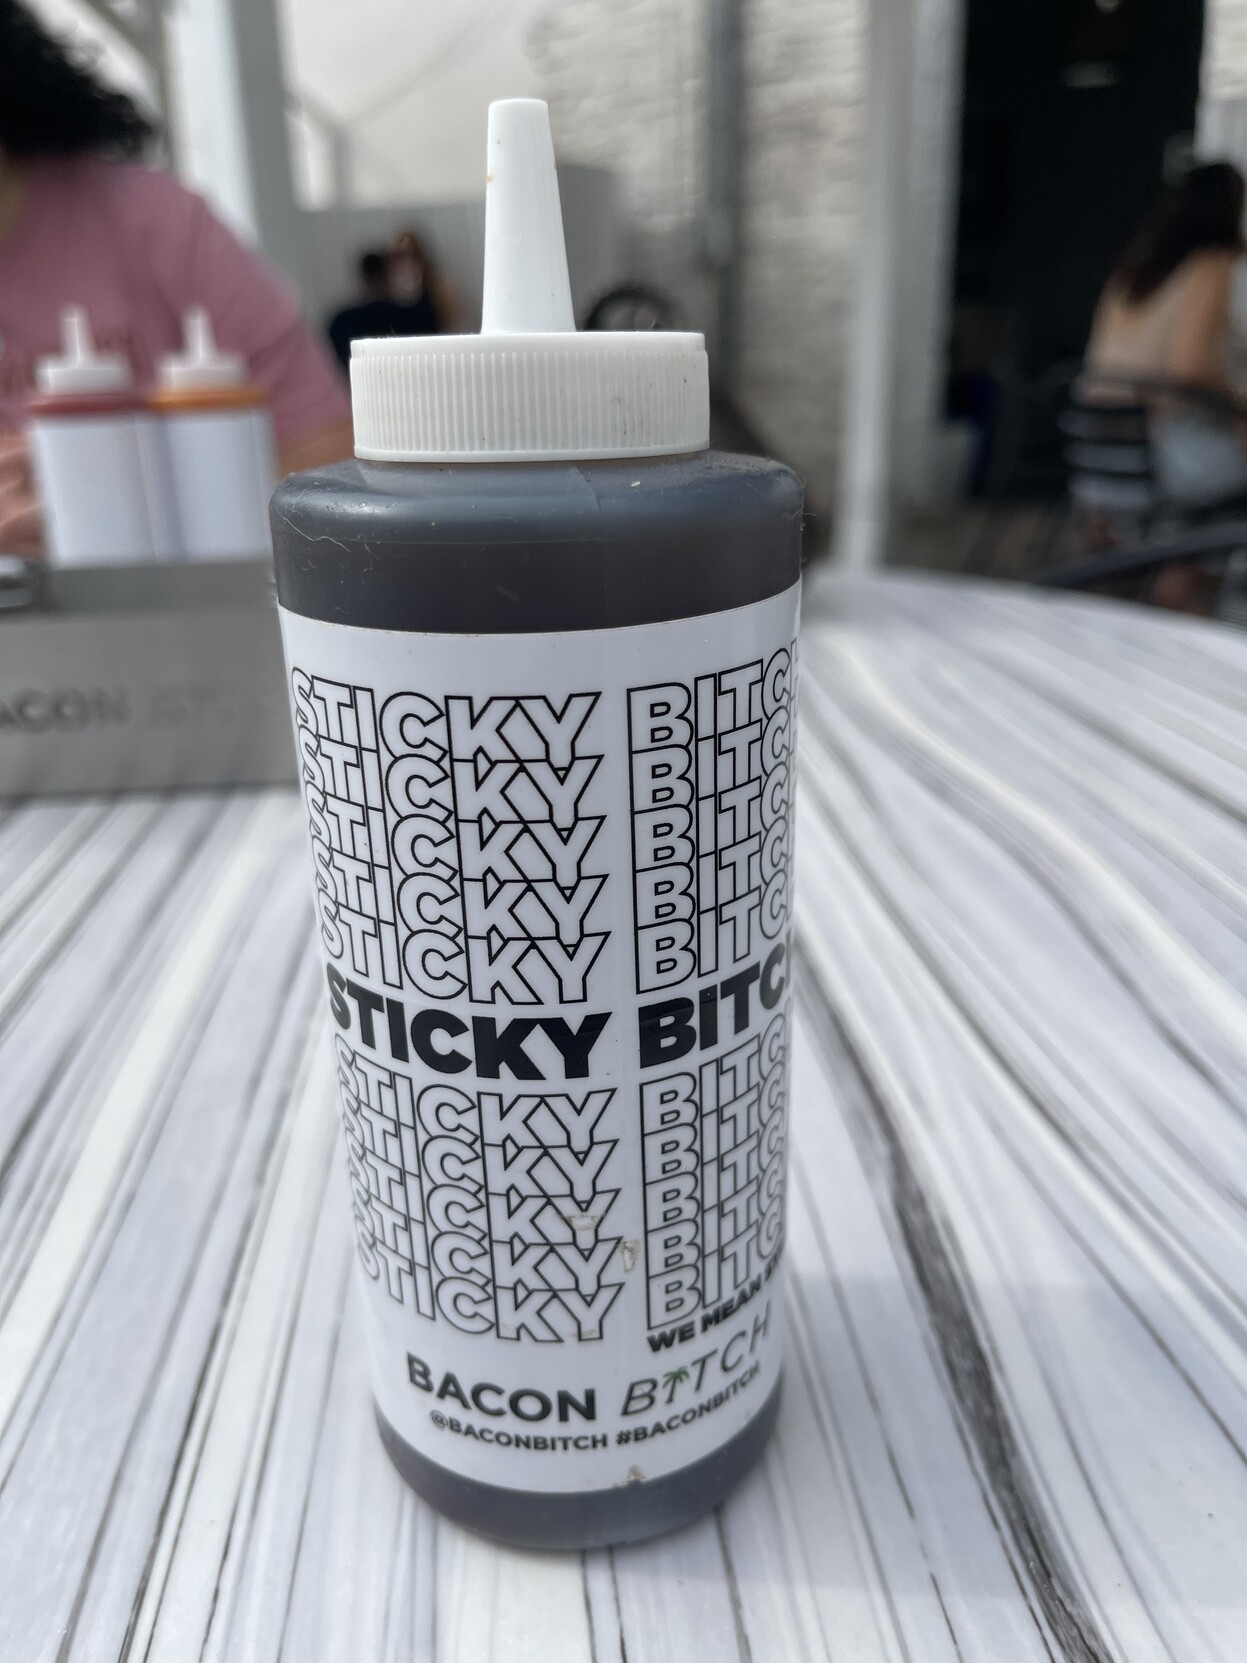 at a restaurant called “bacon bitch”, a bottle of syrup extravagantly labeled “sticky bitch”. 